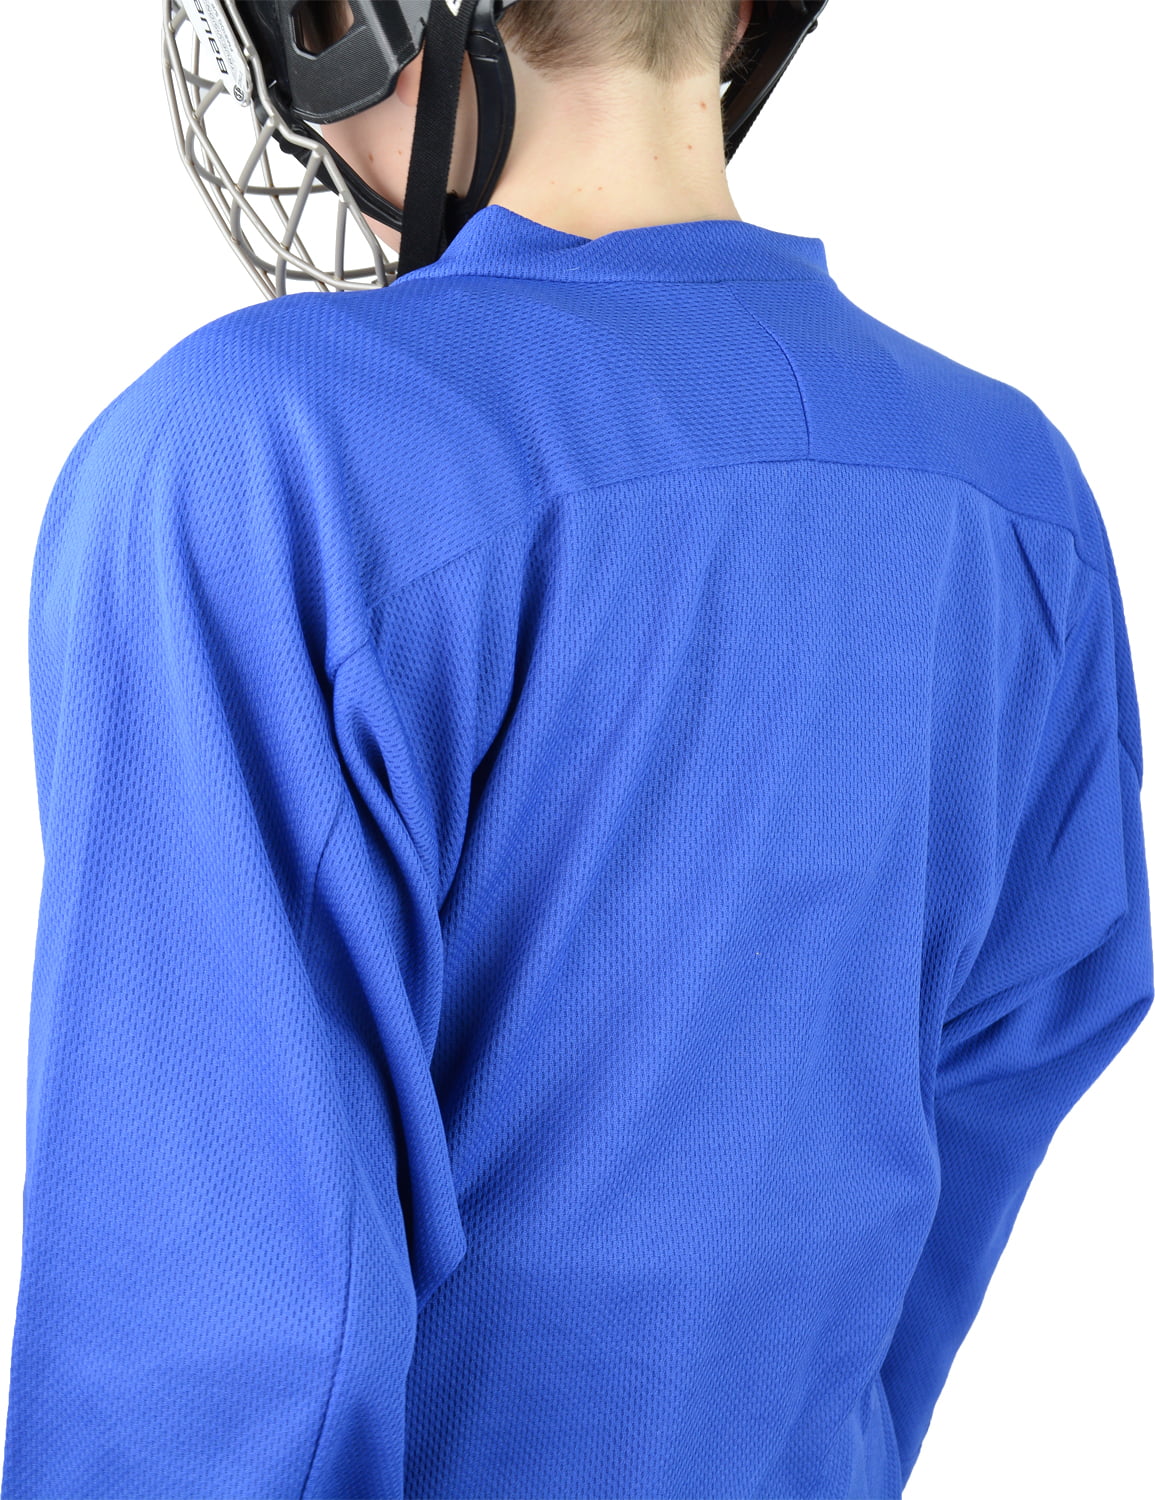 Sports Unlimited Youth Hockey Practice Jersey 